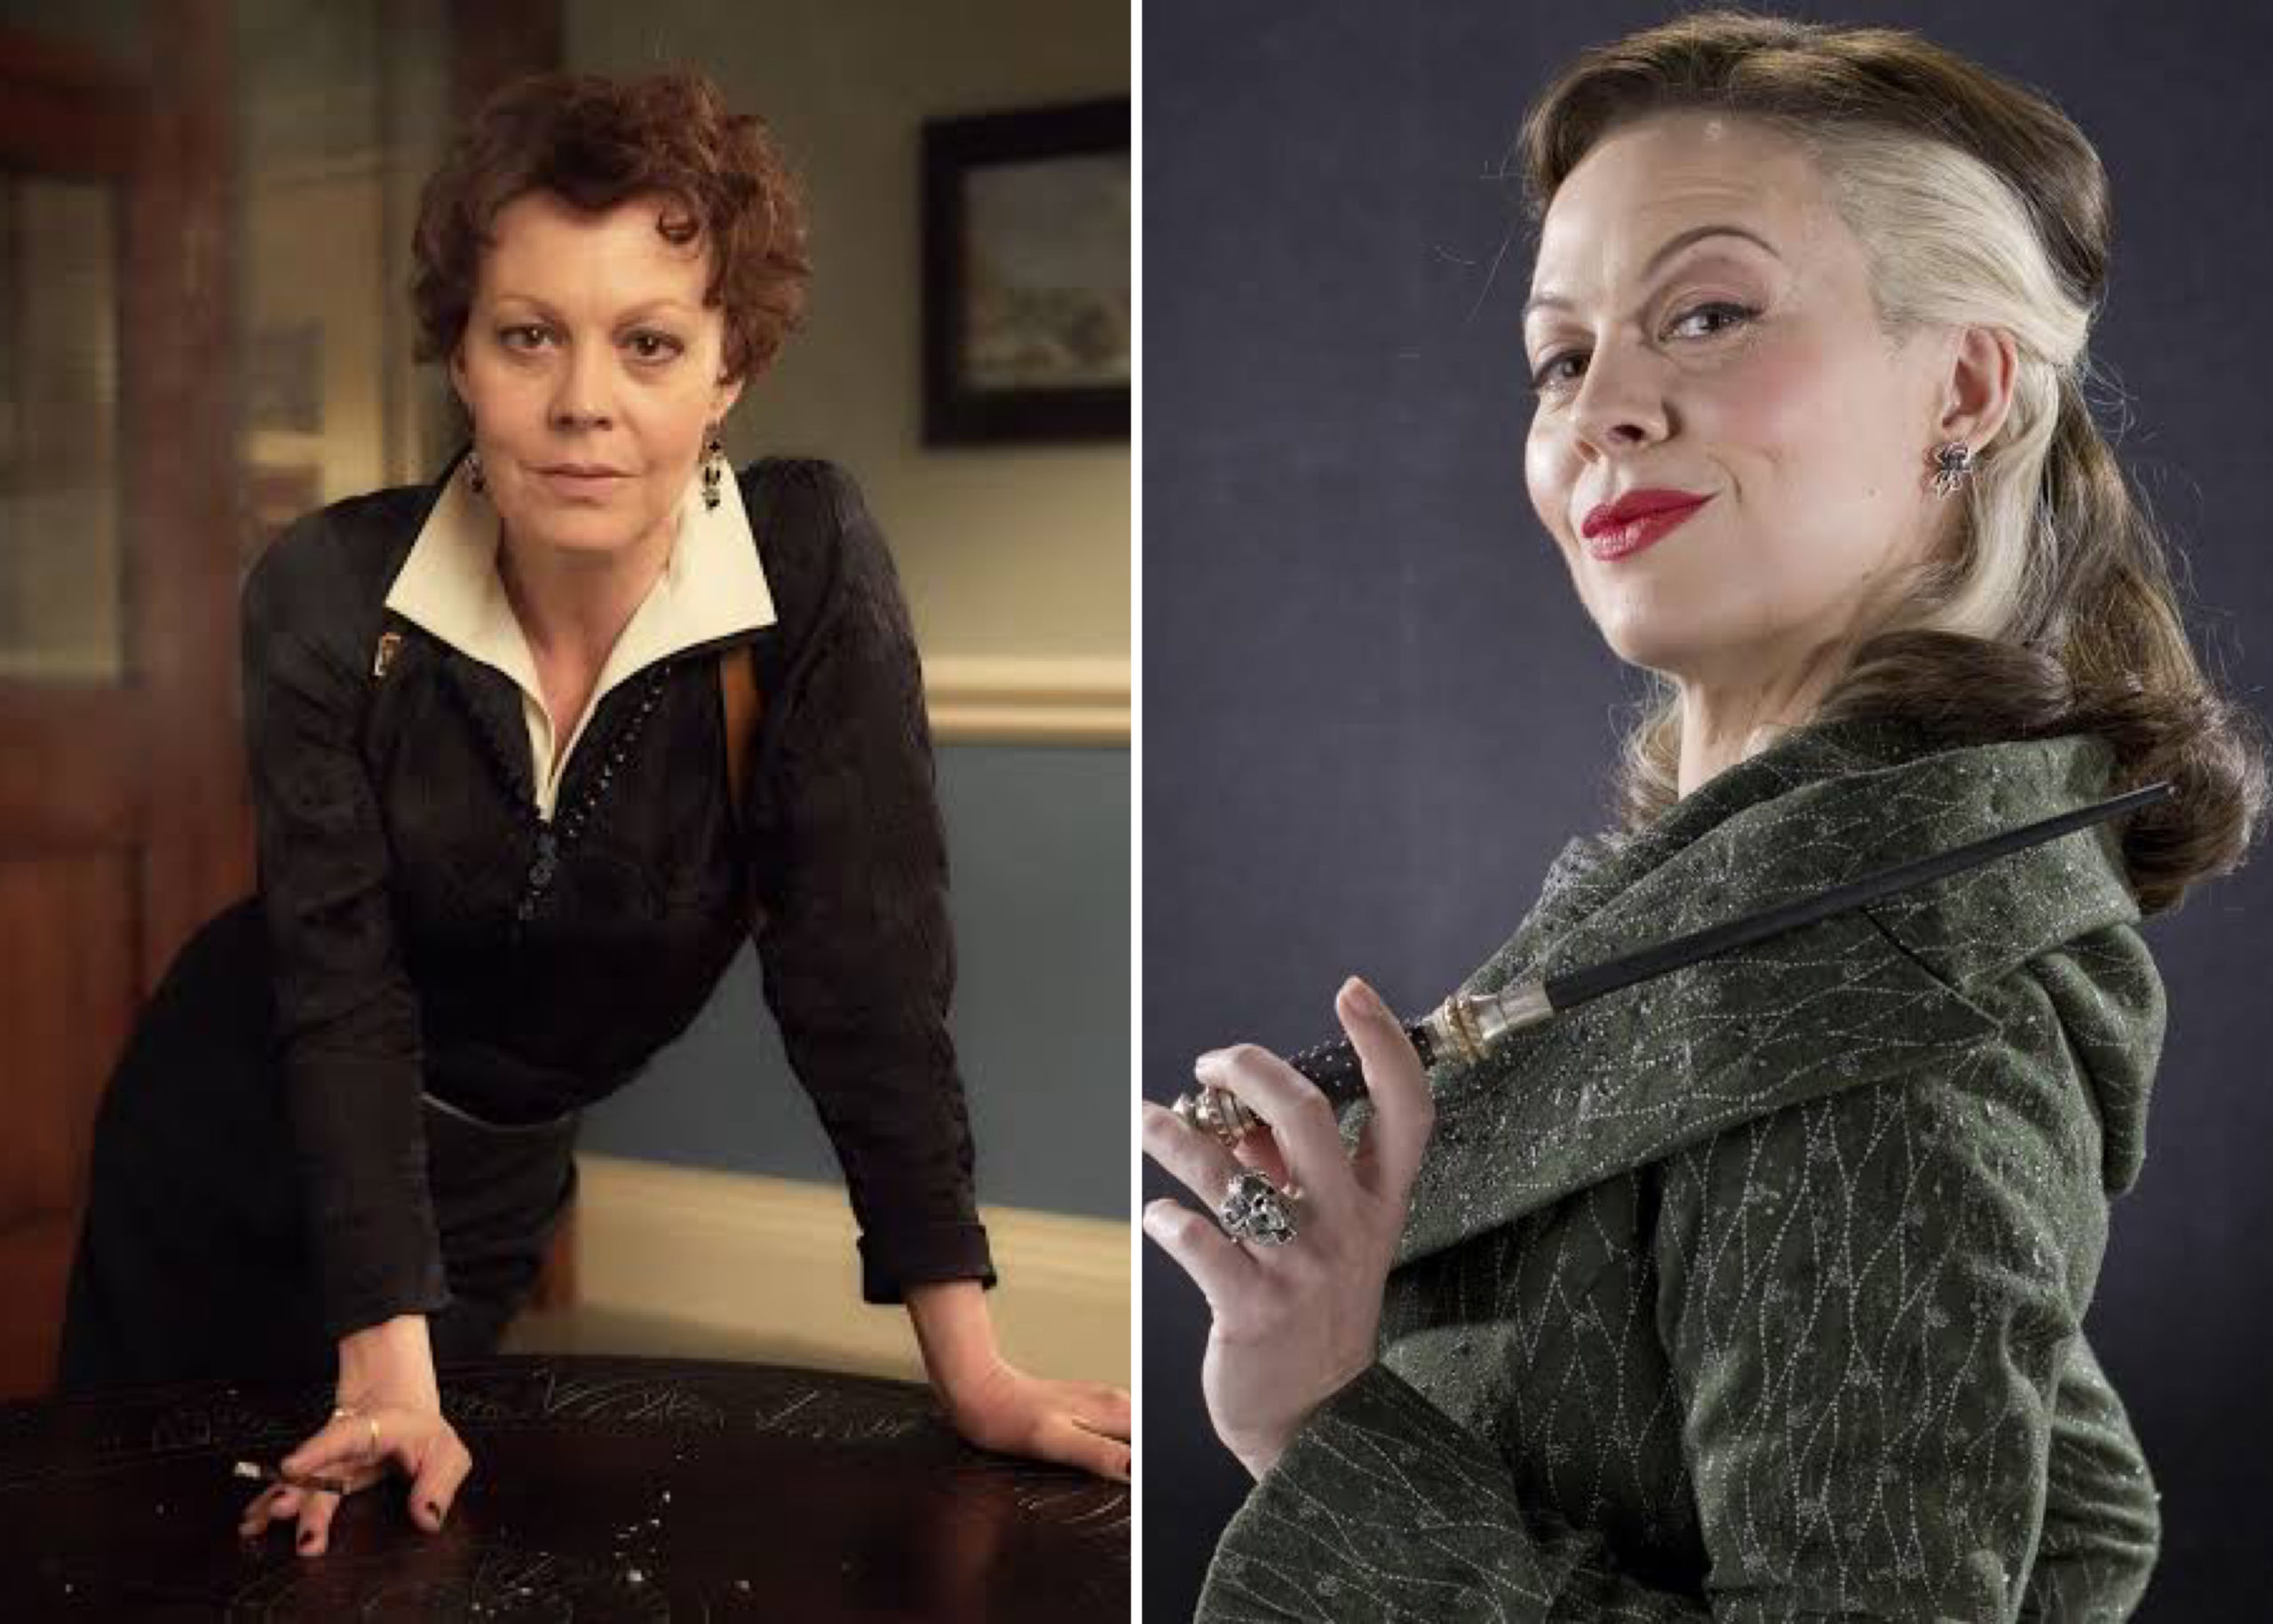 Peaky Blinders And Harry Potter Star, Helen McCrory Dies From Cancer At 52